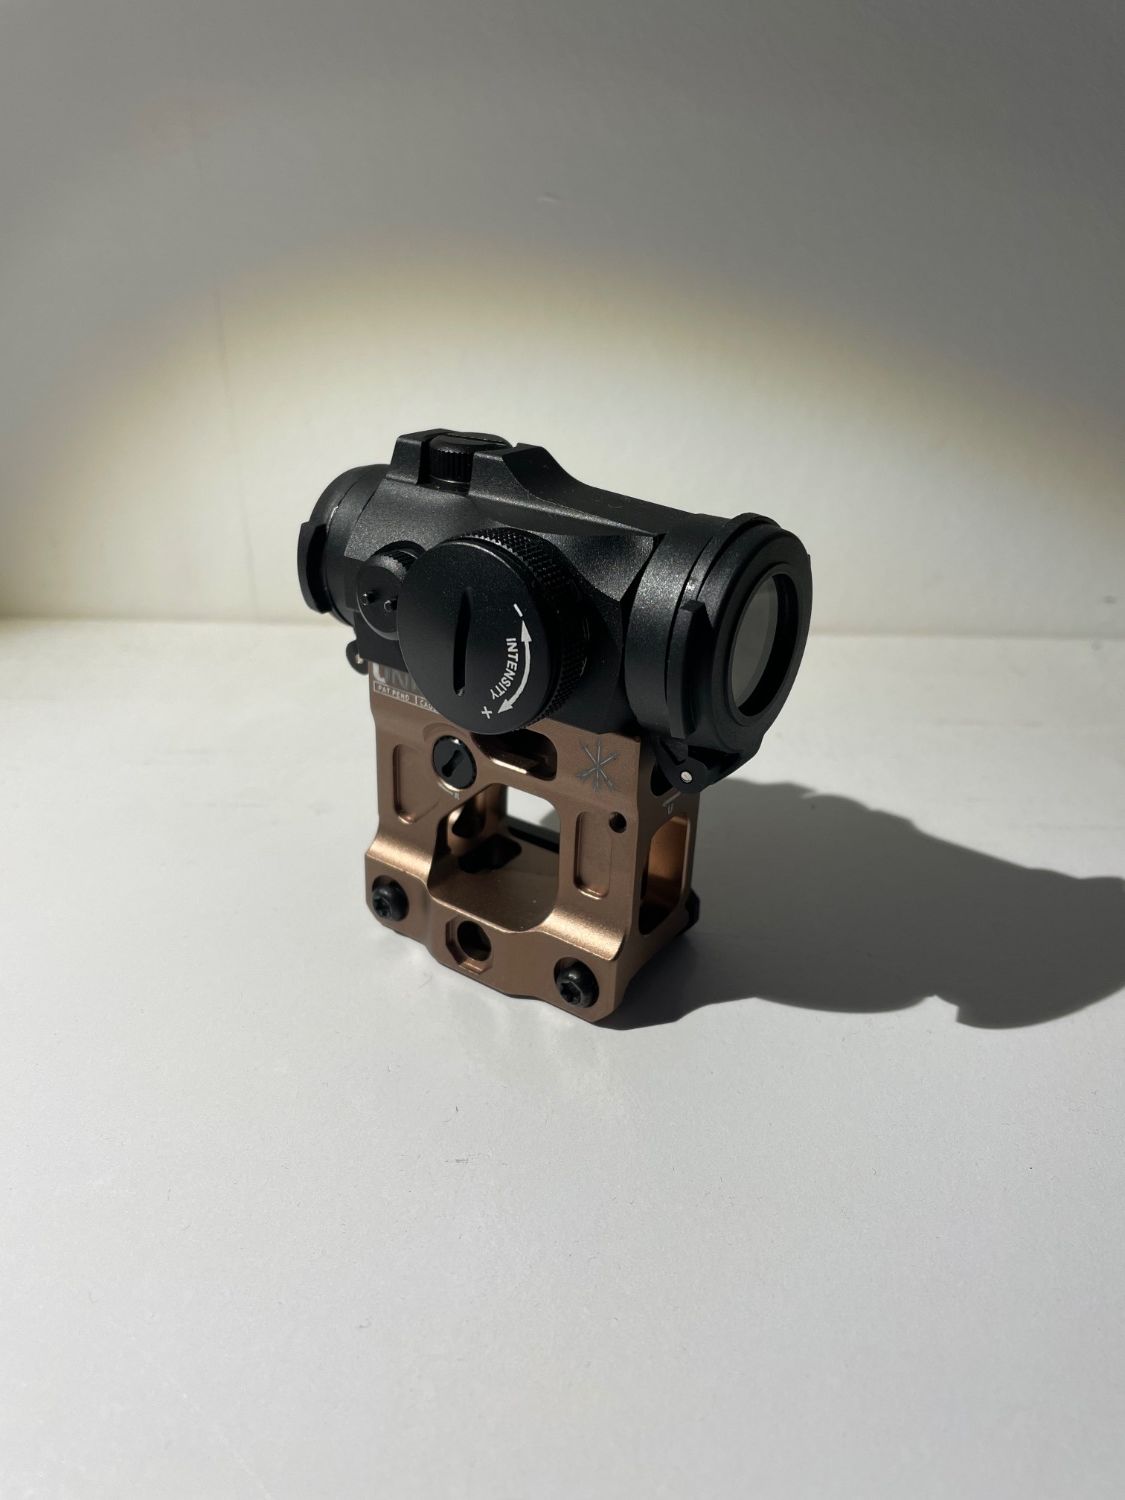 Holy Warrior Aimpoint T2 w FDE “Unity” mount - Parts